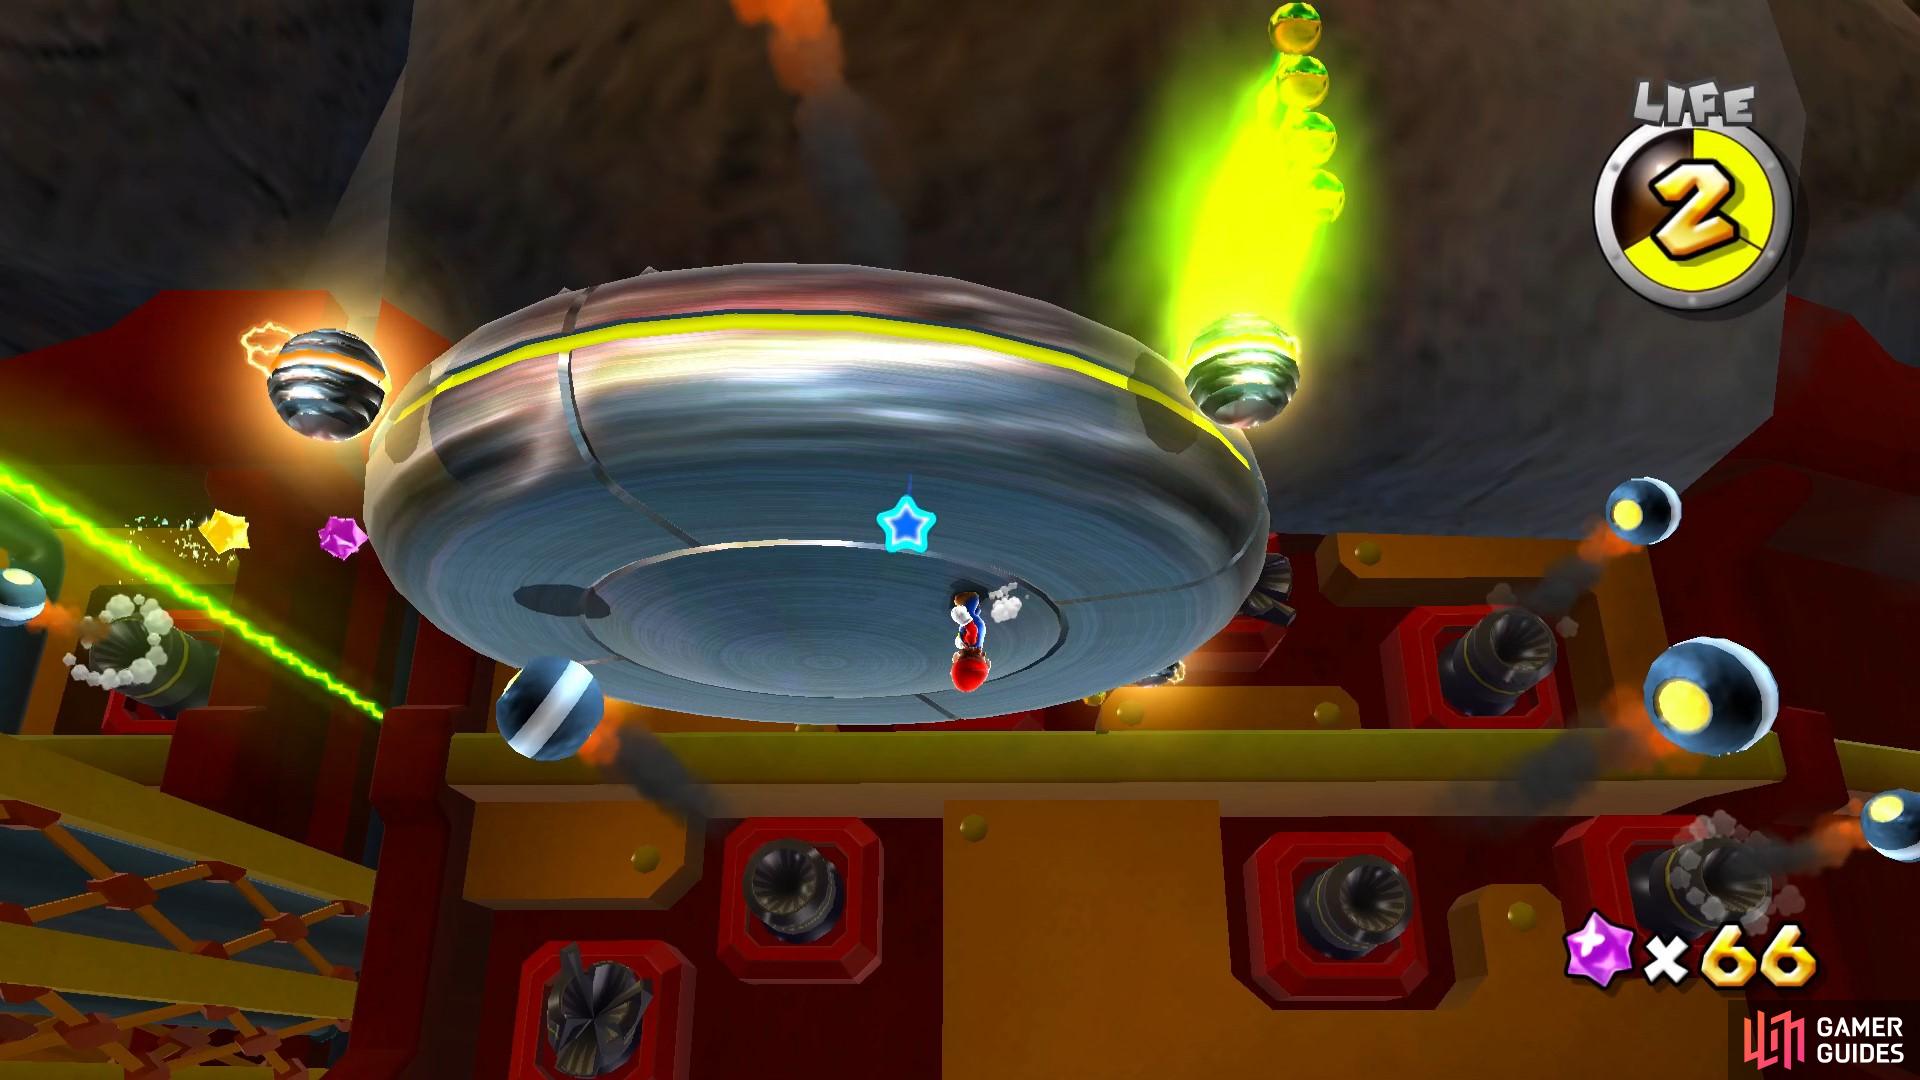 Run to the bottom side of the saucer to avoid the electric wires.